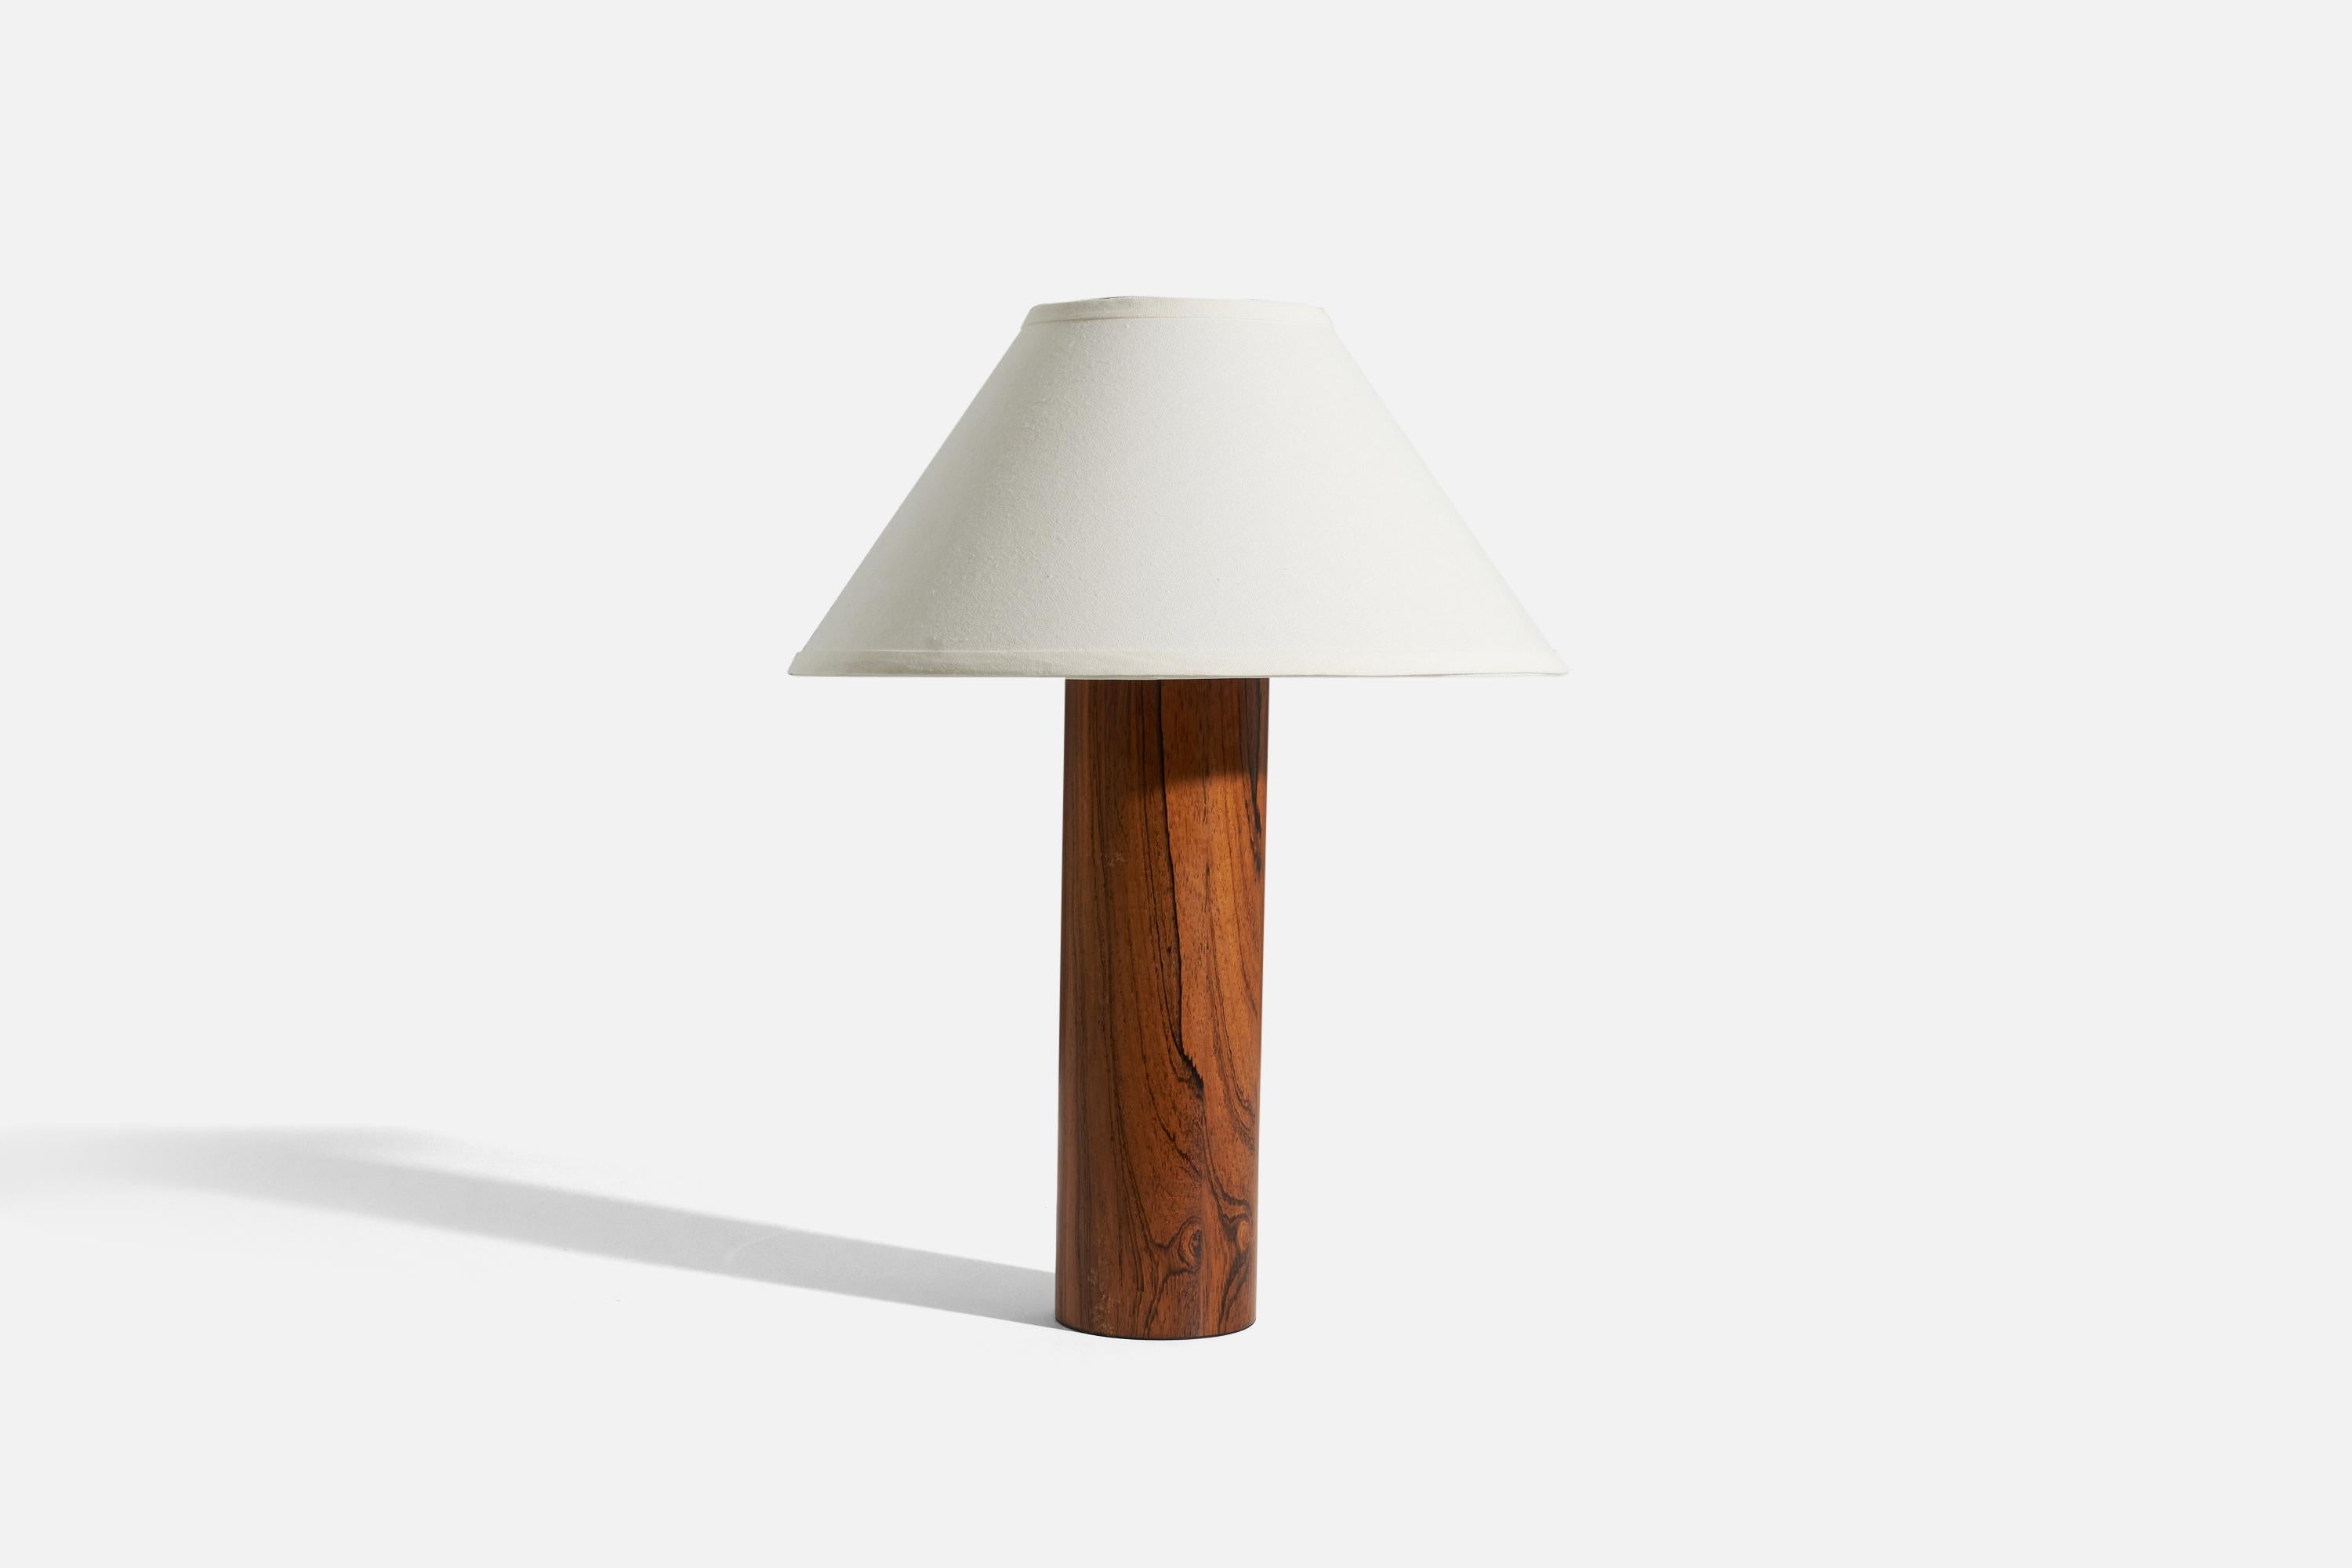 A rosewood table lamp designed and produced by Luxus Vittsjö, Sweden, c. 1960s.

Sold without lampshade. 
Dimensions of Lamp (inches) : 18.1875 x 4.25 x 4.25 (H x W x D)
Dimensions of Shade (inches) : 6.25 x 16.25 x 9.25 (T x B x H)
Dimension